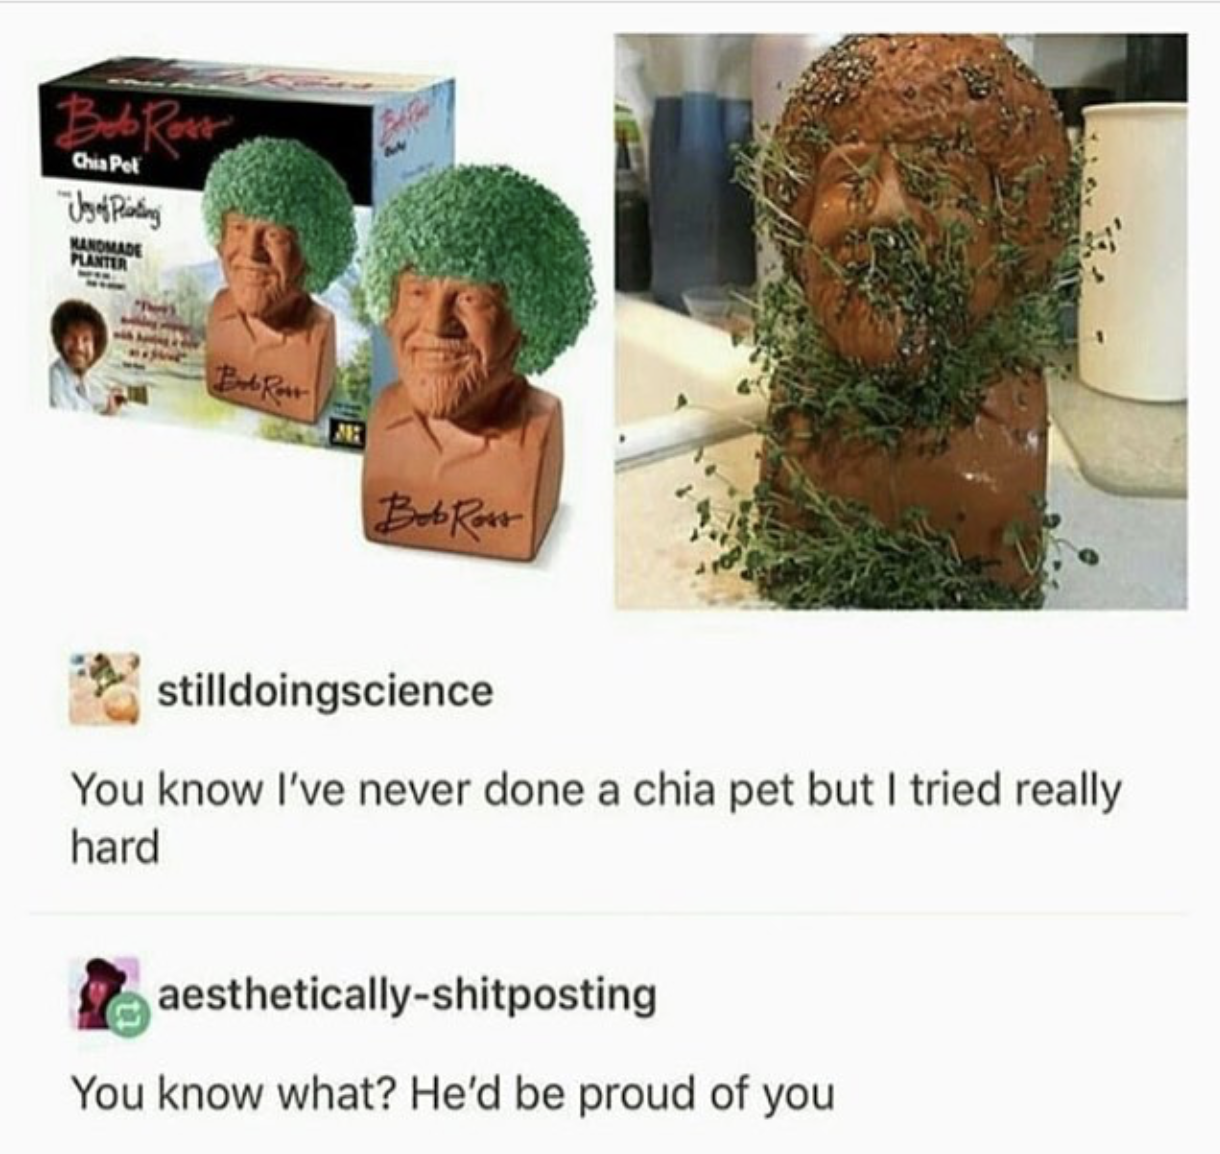 chia bob ross - Opi Uso Pinting Planter Bob Rost stilldoingscience You know I've never done a chia pet but I tried really hard aestheticallyshitposting You know what? He'd be proud of you